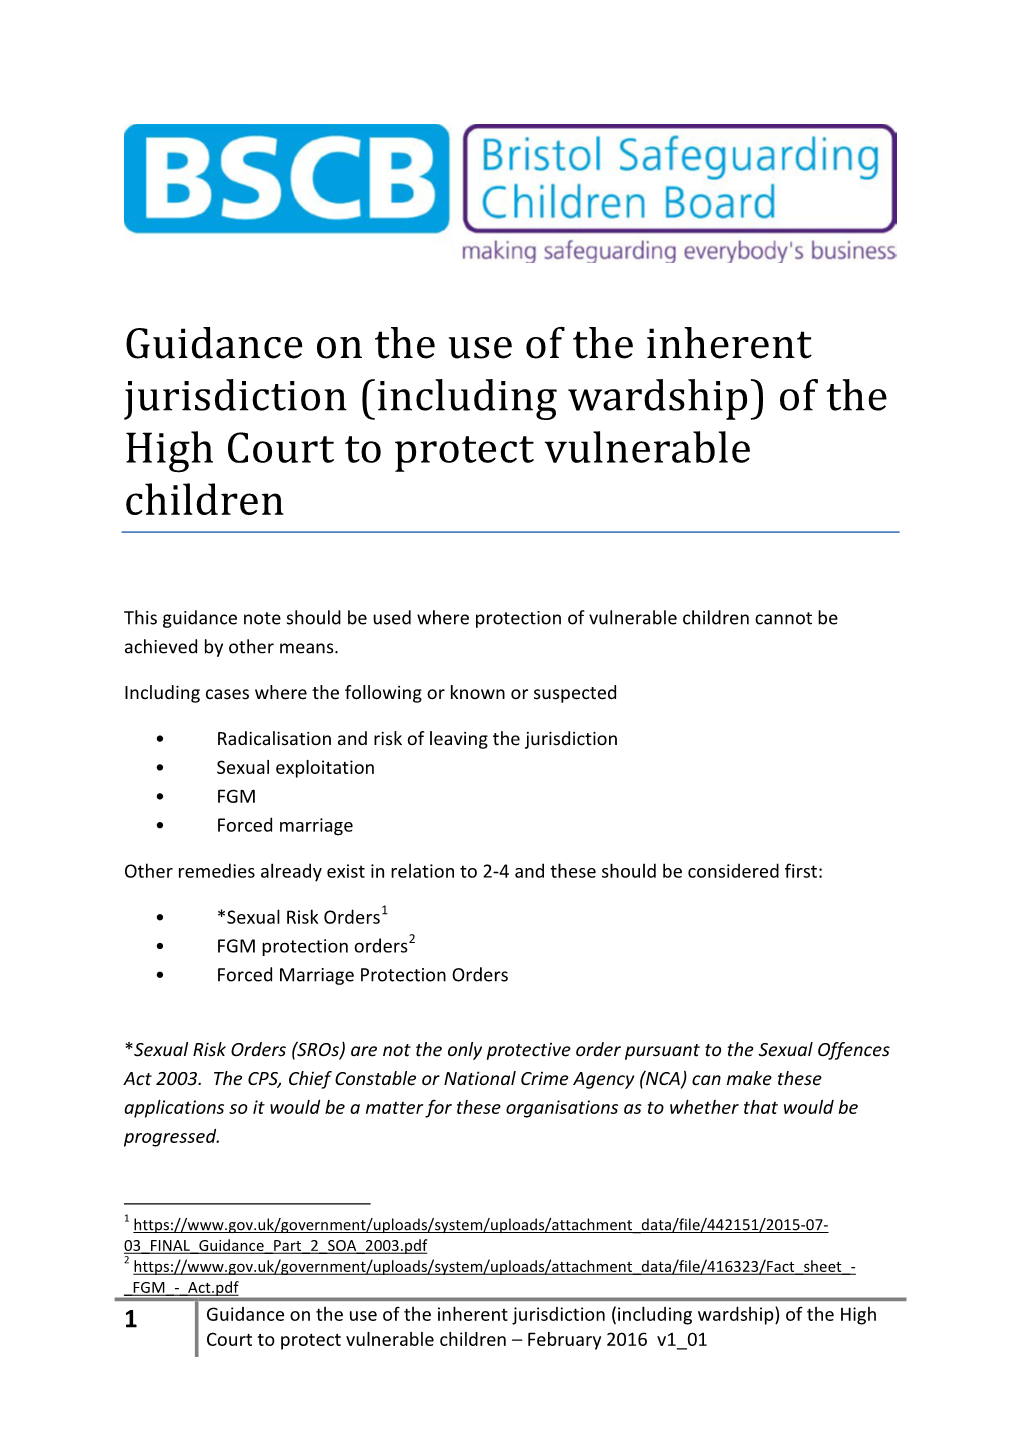 Guidance to Protect Vulnerable Children